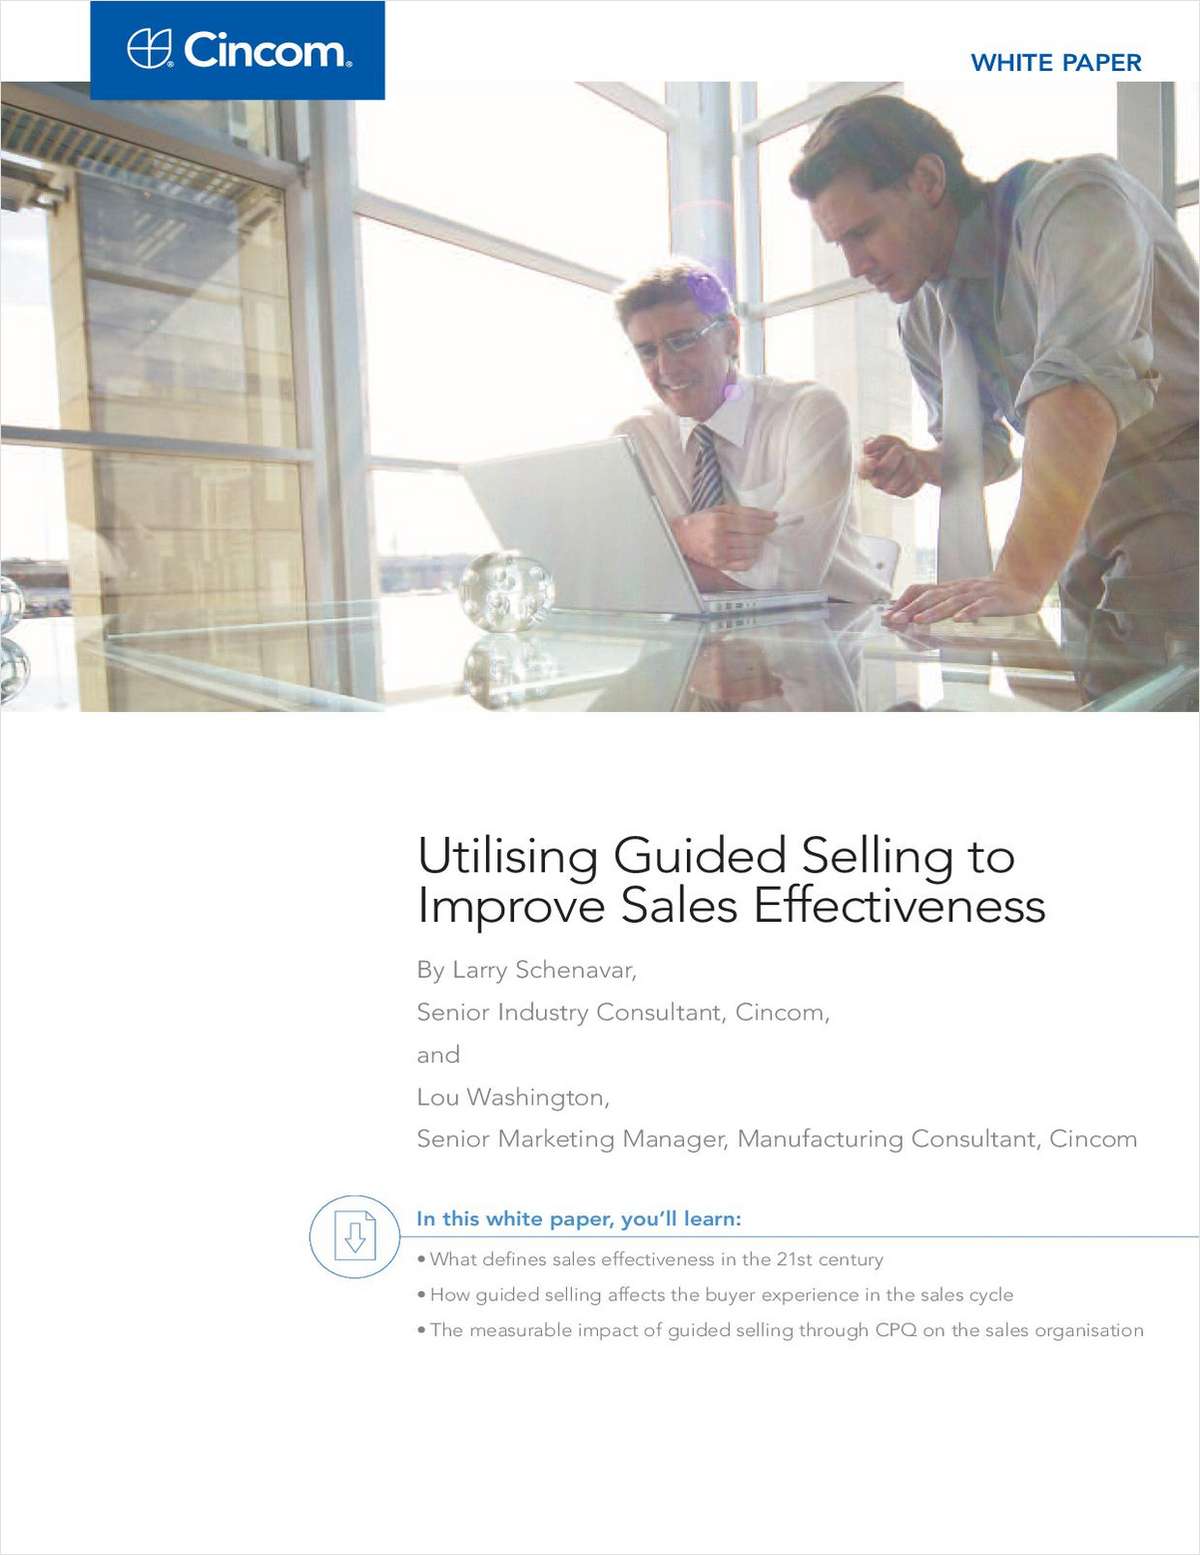 White Paper: Utilising Guided Selling to Improve Sales Effectiveness